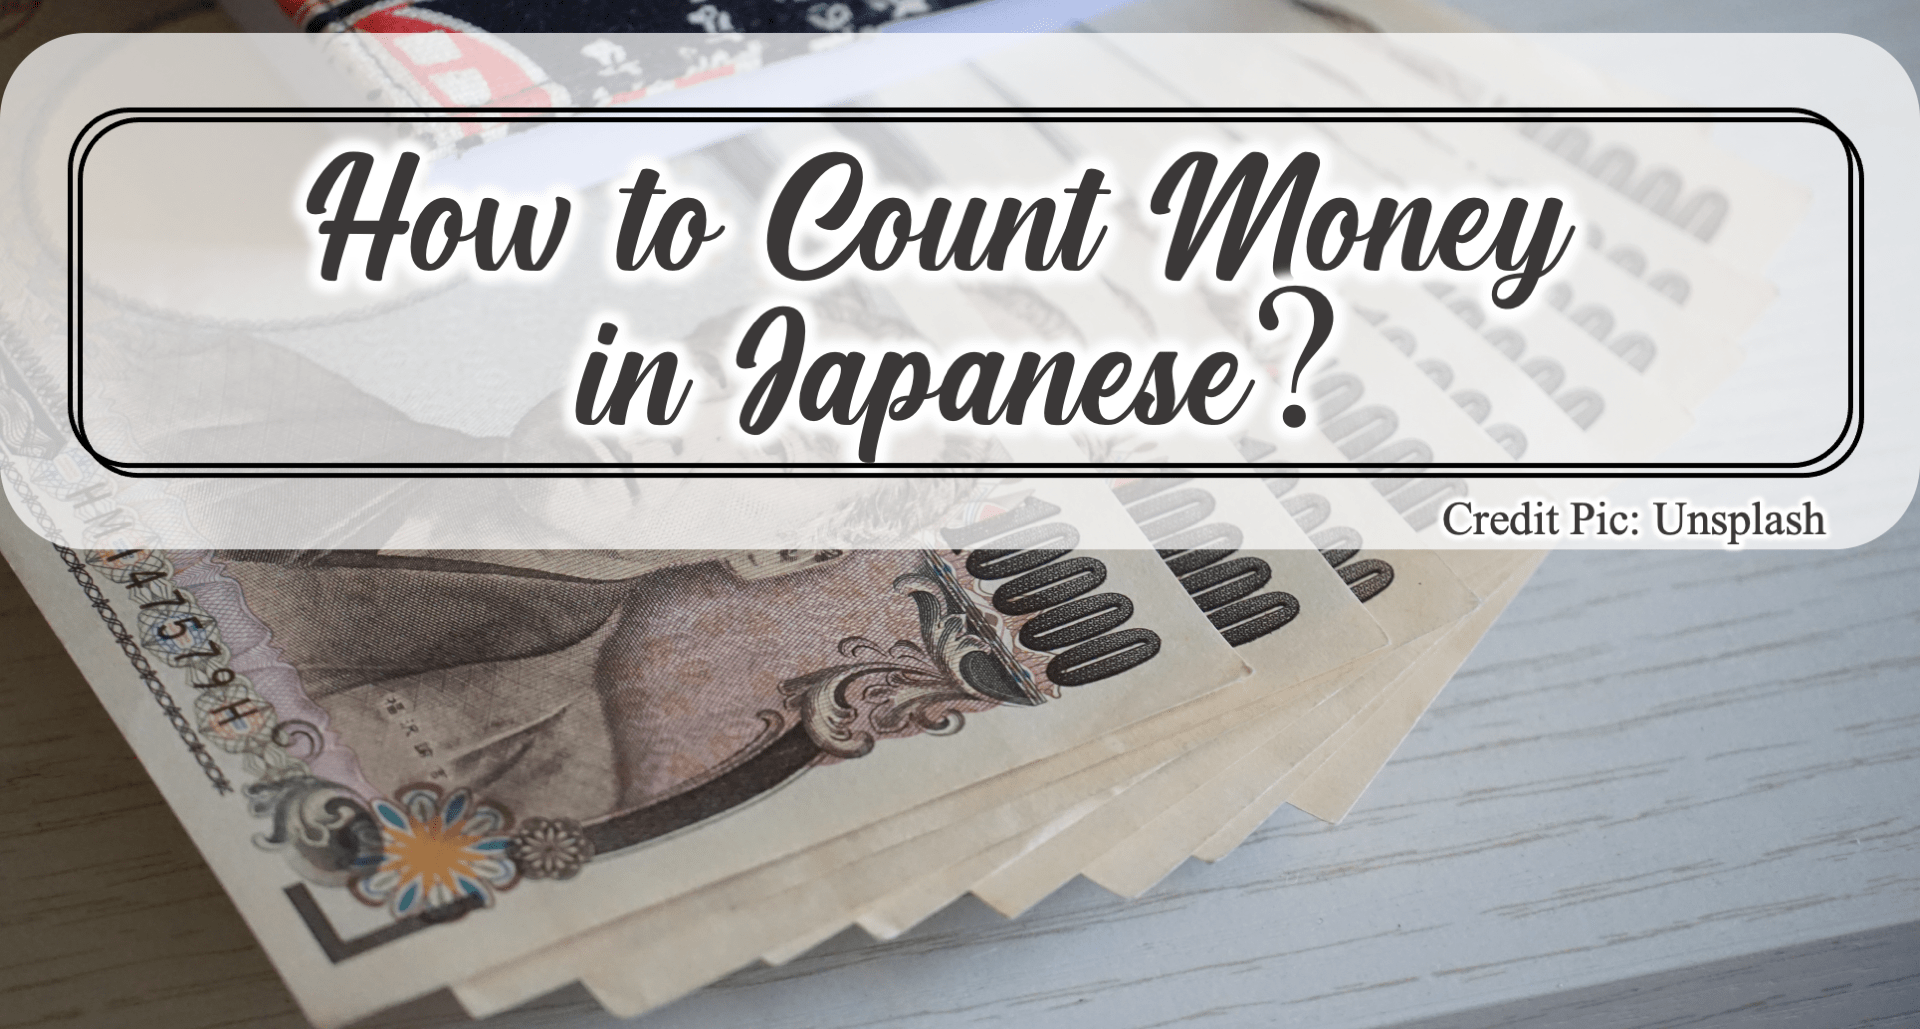 how-to-count-money-in-japanese-edopen-japan